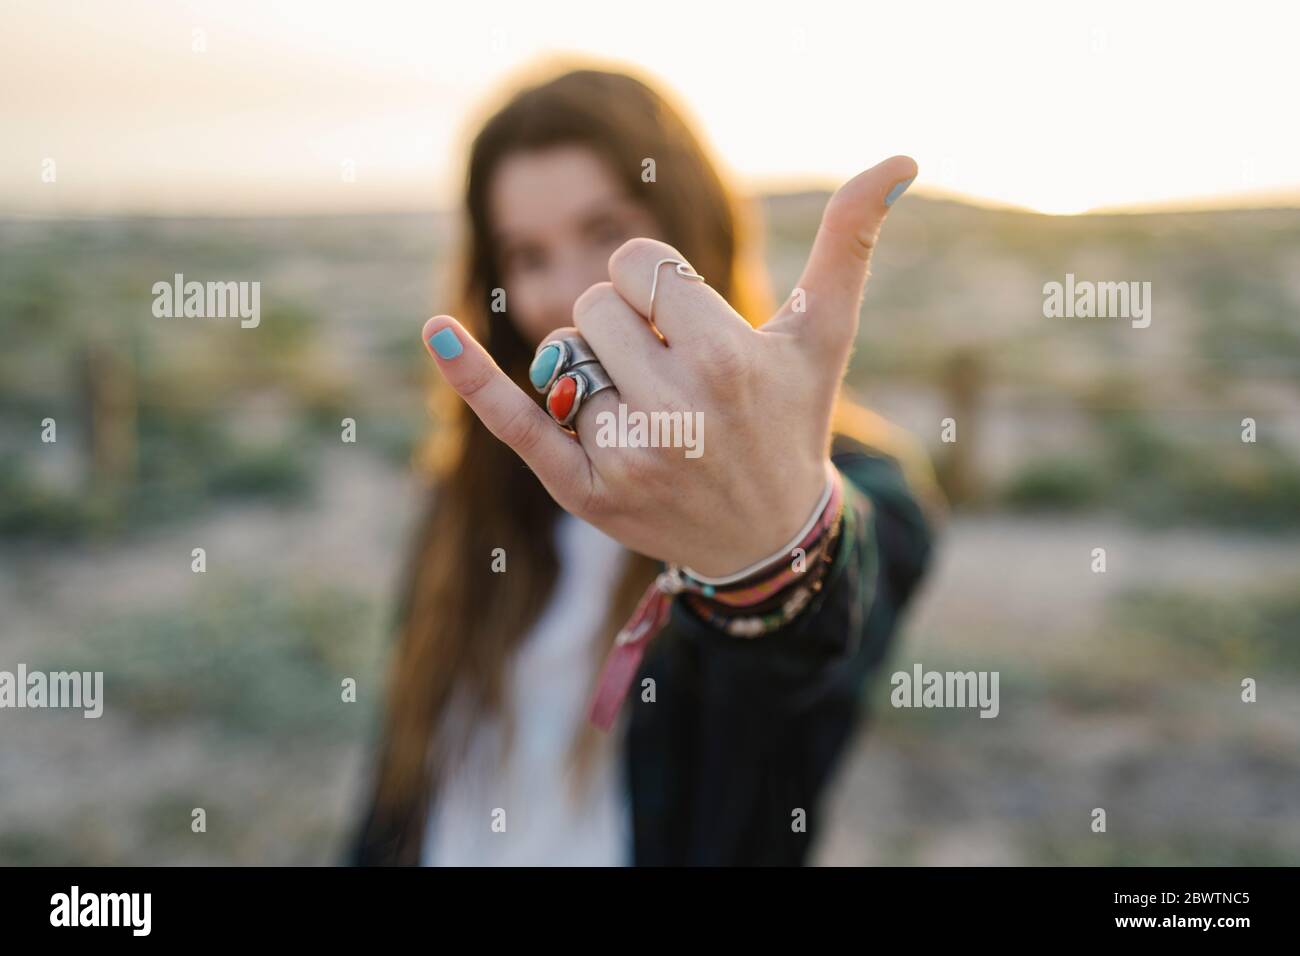 Hand of woman showing shaka sign, close-up Stock Photo